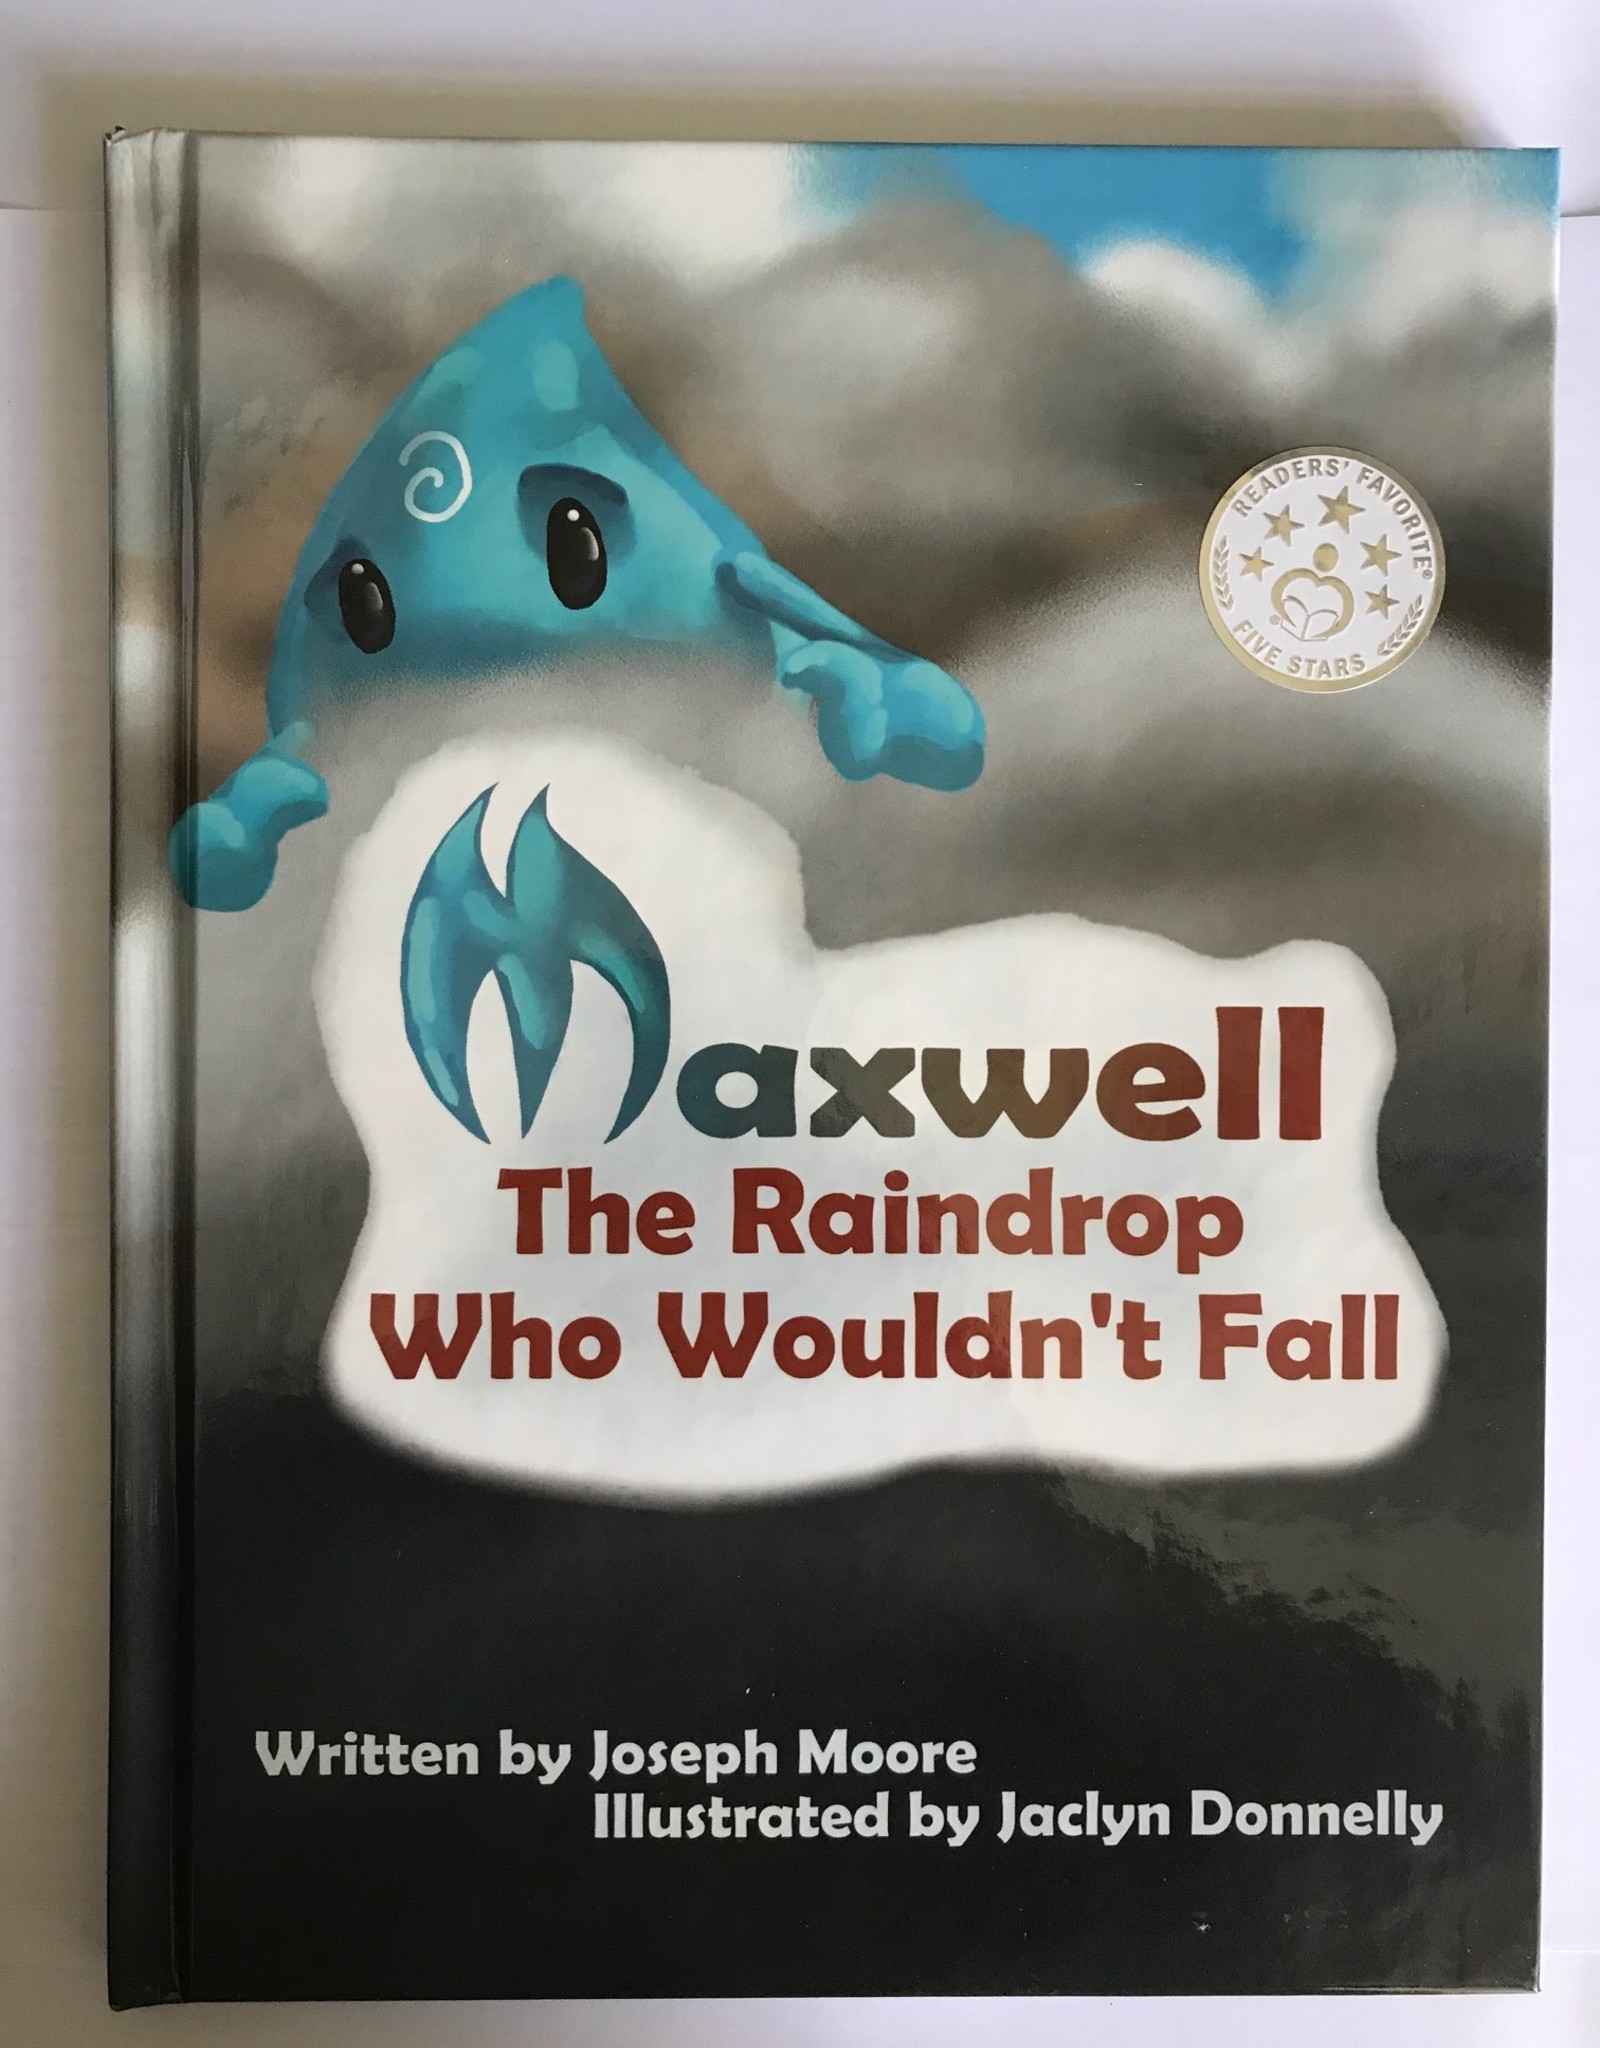 Maxwell the Raindrop - Who Wouldn't Fall - Hardback - Johnstown Inclined  Plane Online Store